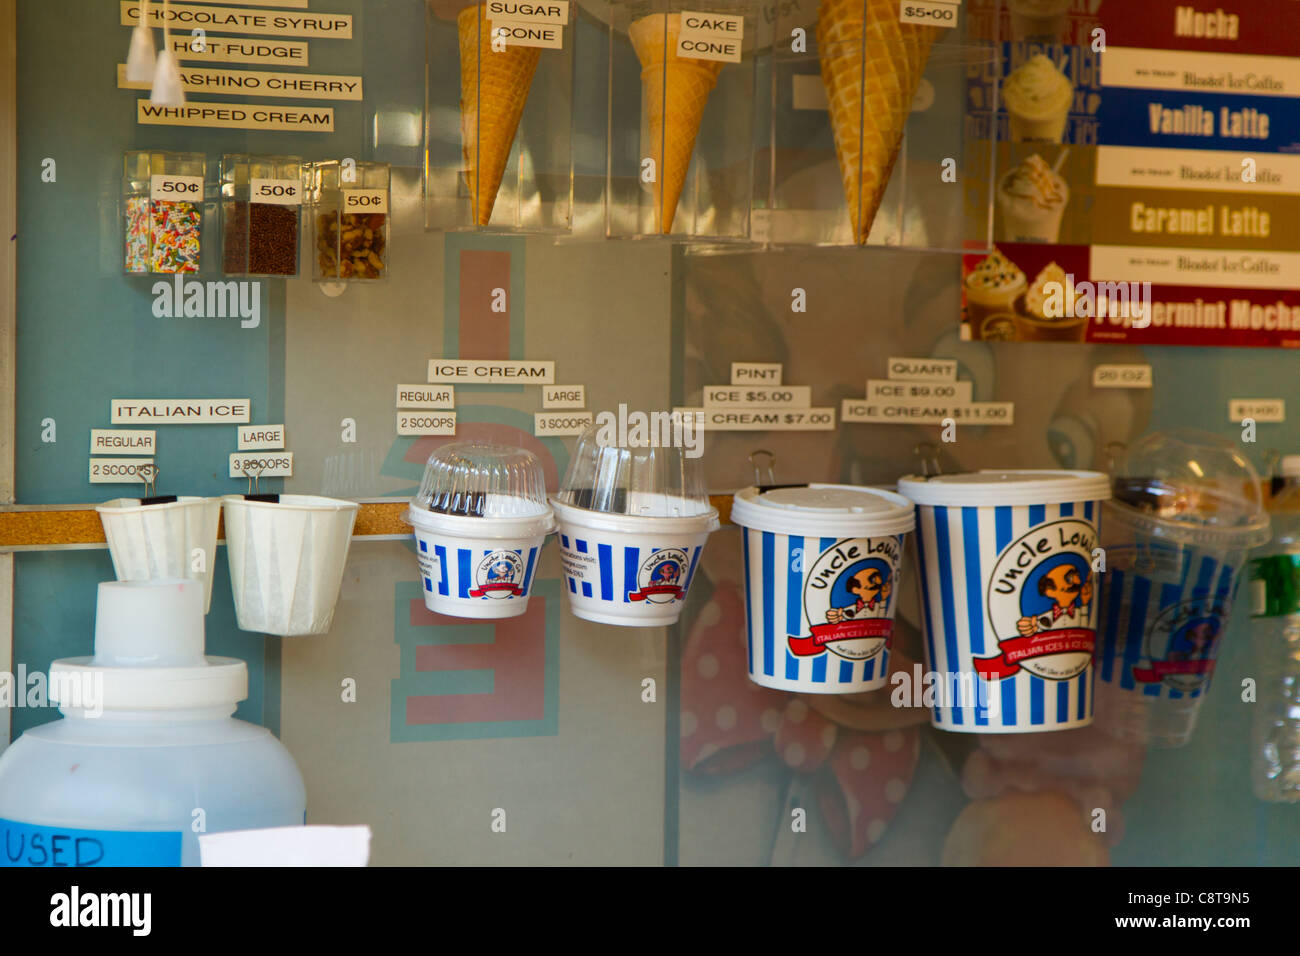 Display at ice cream shop offering different size cups and cones Stock Photo